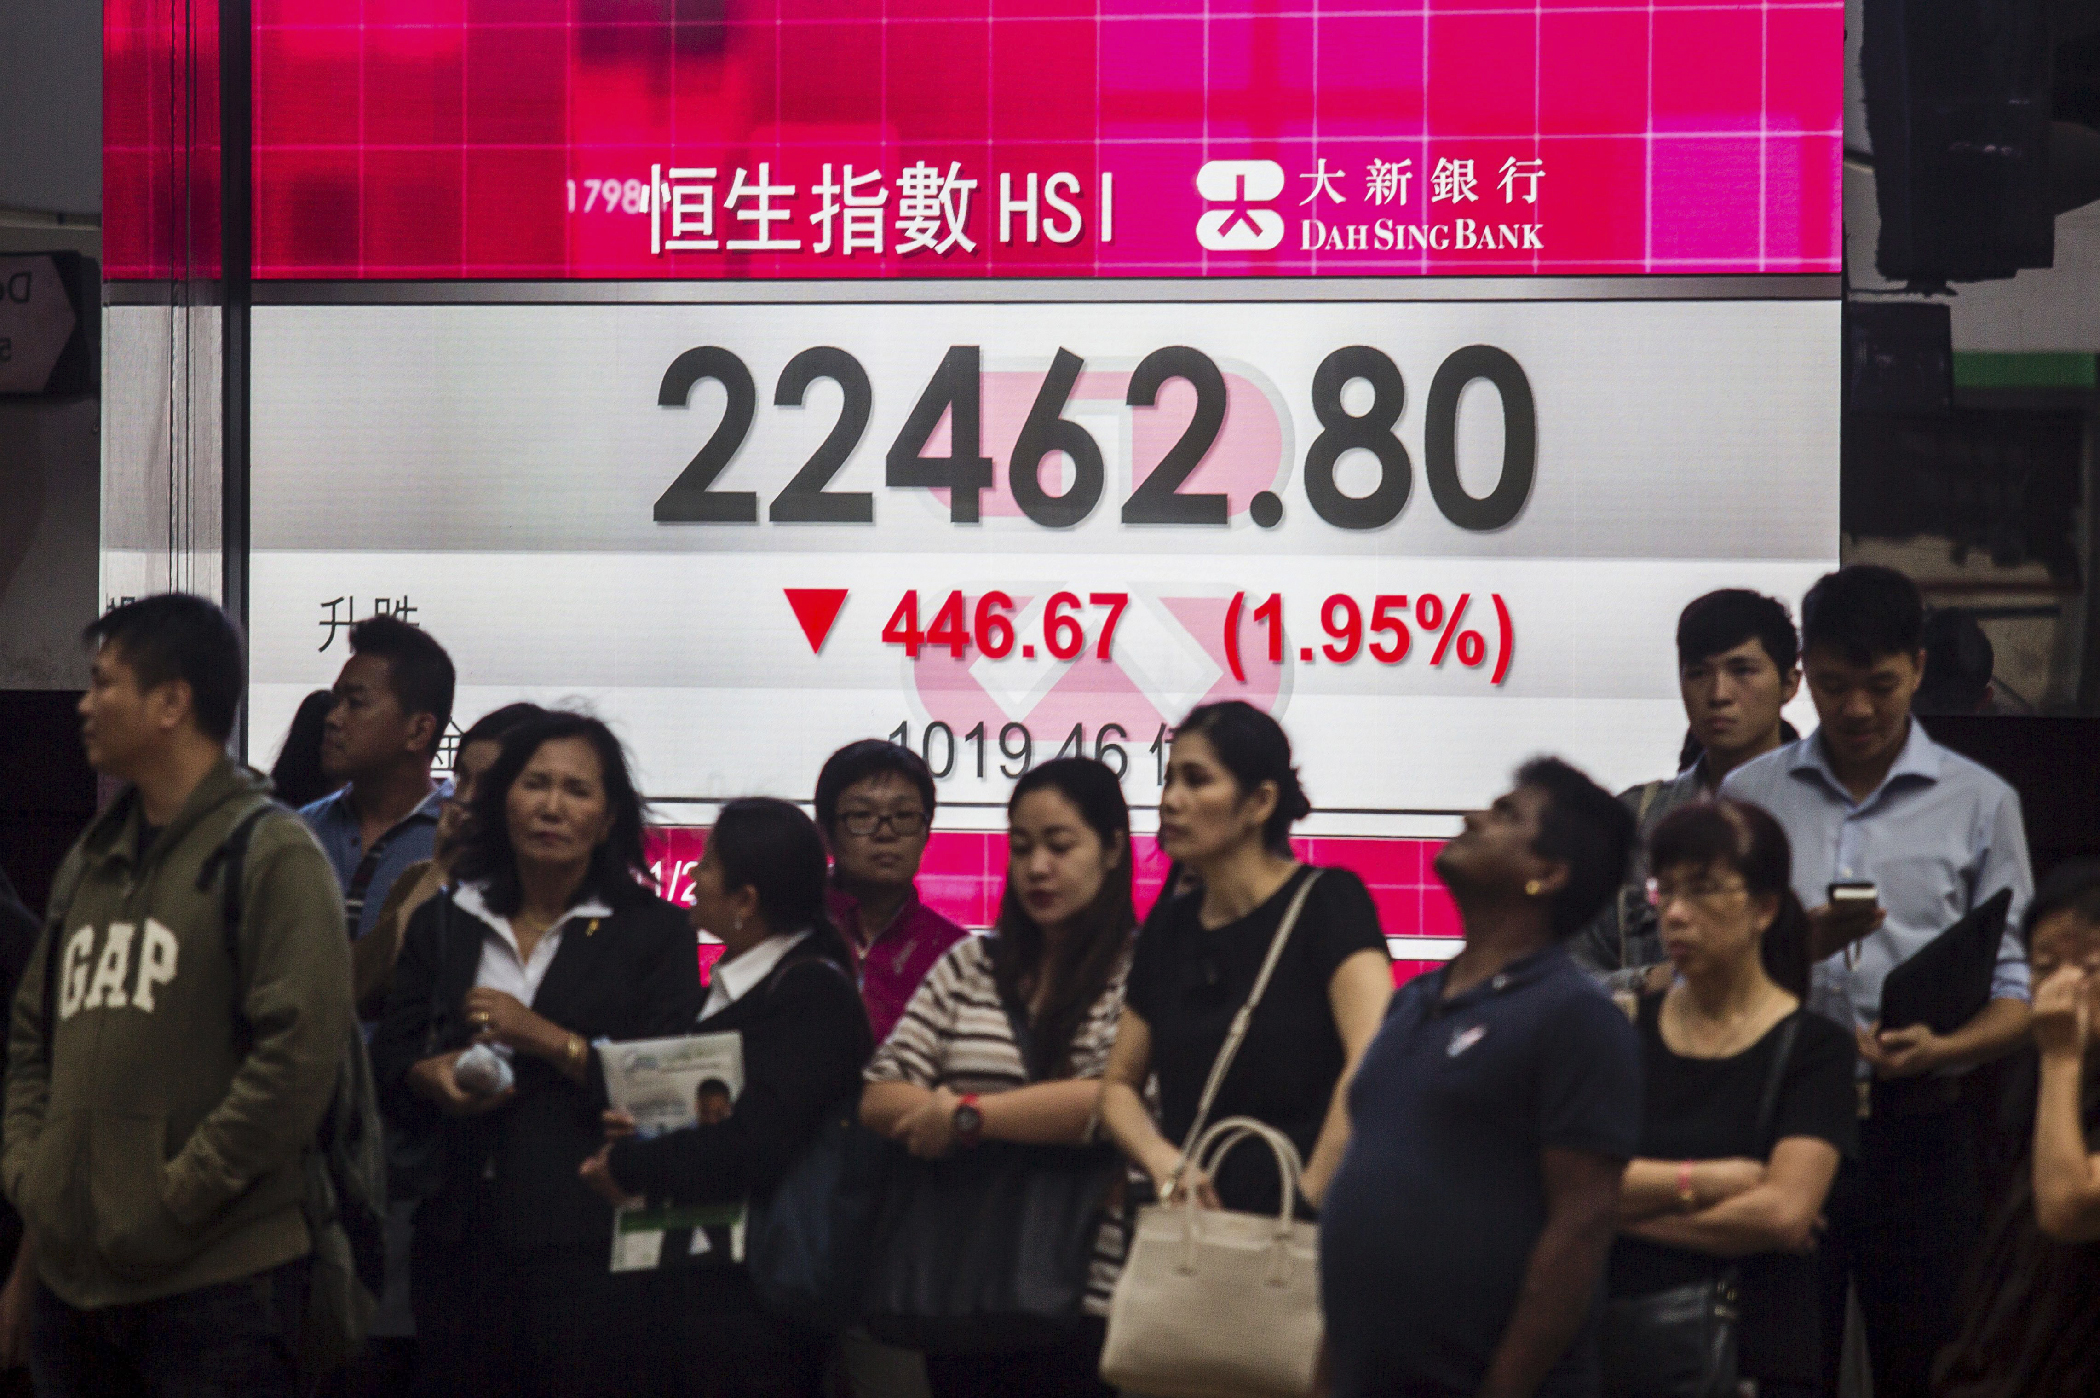 Asian markets were up and running during the wee hours of the morning in the U.S., when Trump's gain on electoral college votes surpassed Clinton's. Hong Kong’s Hang Seng index <a href="http://www.latimes.com/nation/politics/trailguide/la-na-election-day-2016-asian-markets-slump-in-reaction-to-1478675294-htmlstory.html" target="_blank">fell to 2.6%.</a>